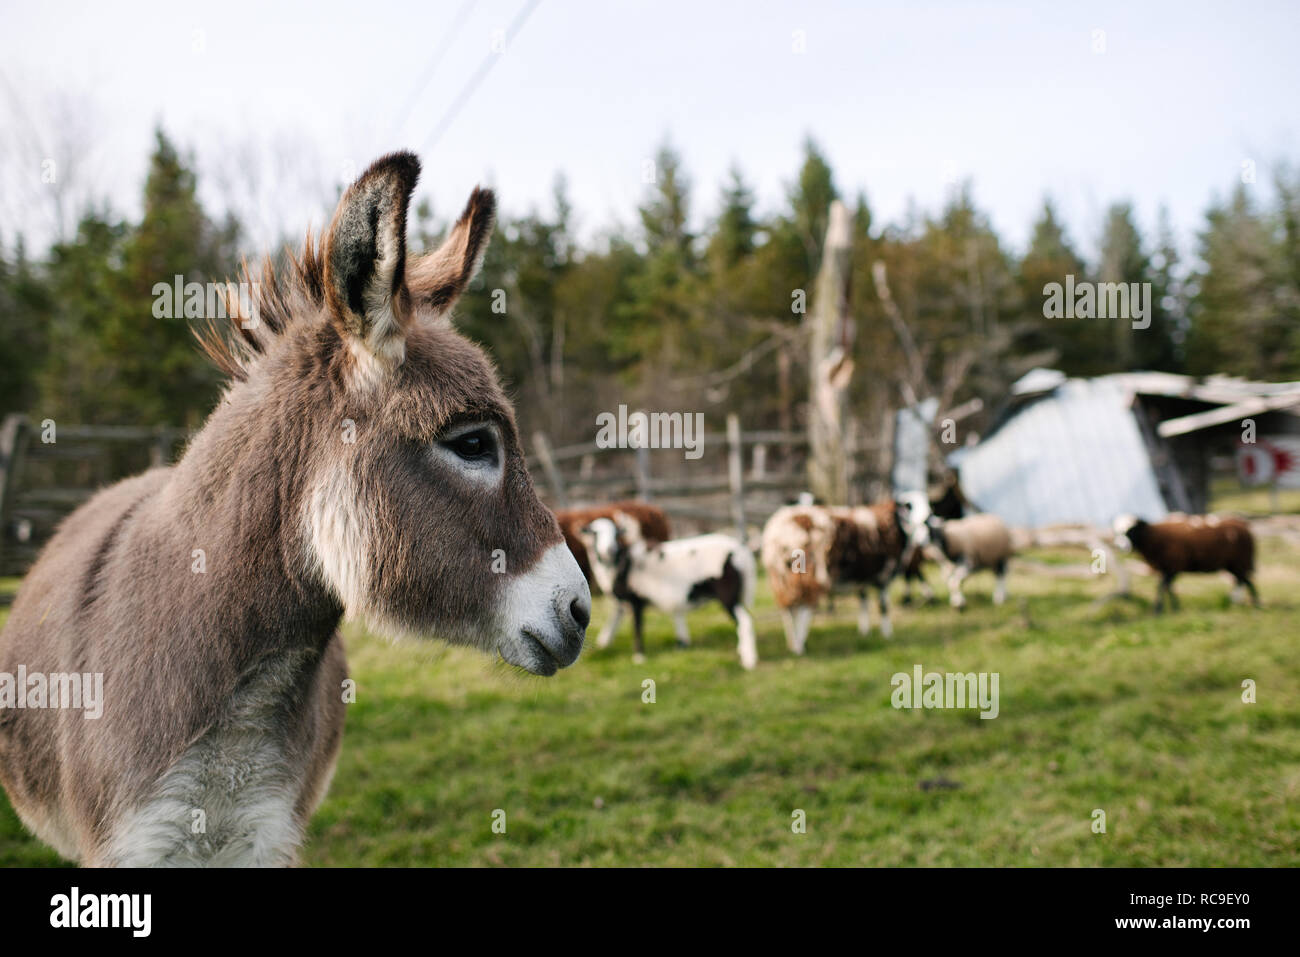 Donkey in farm, cows in background Stock Photo